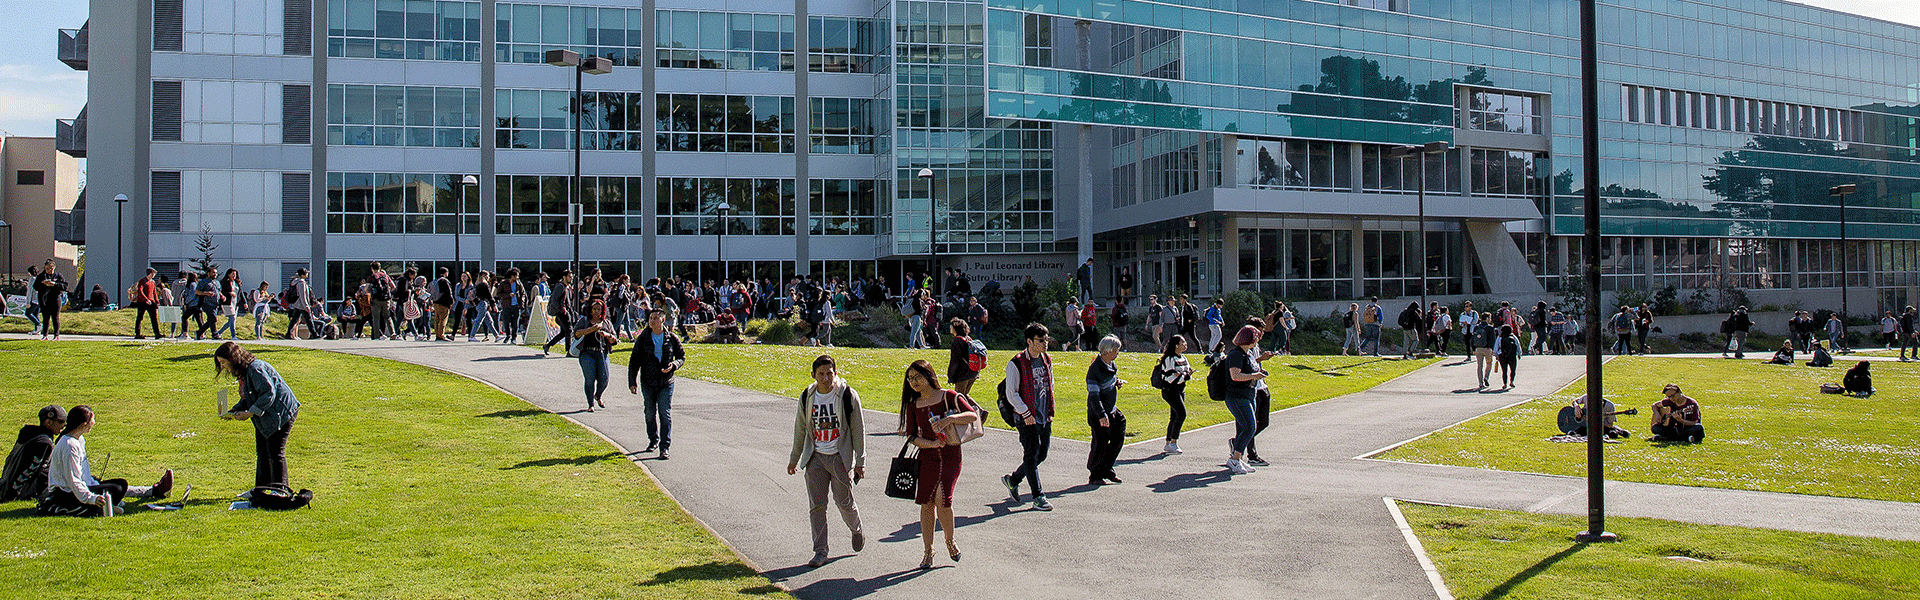 Students walking on campus in front of the library